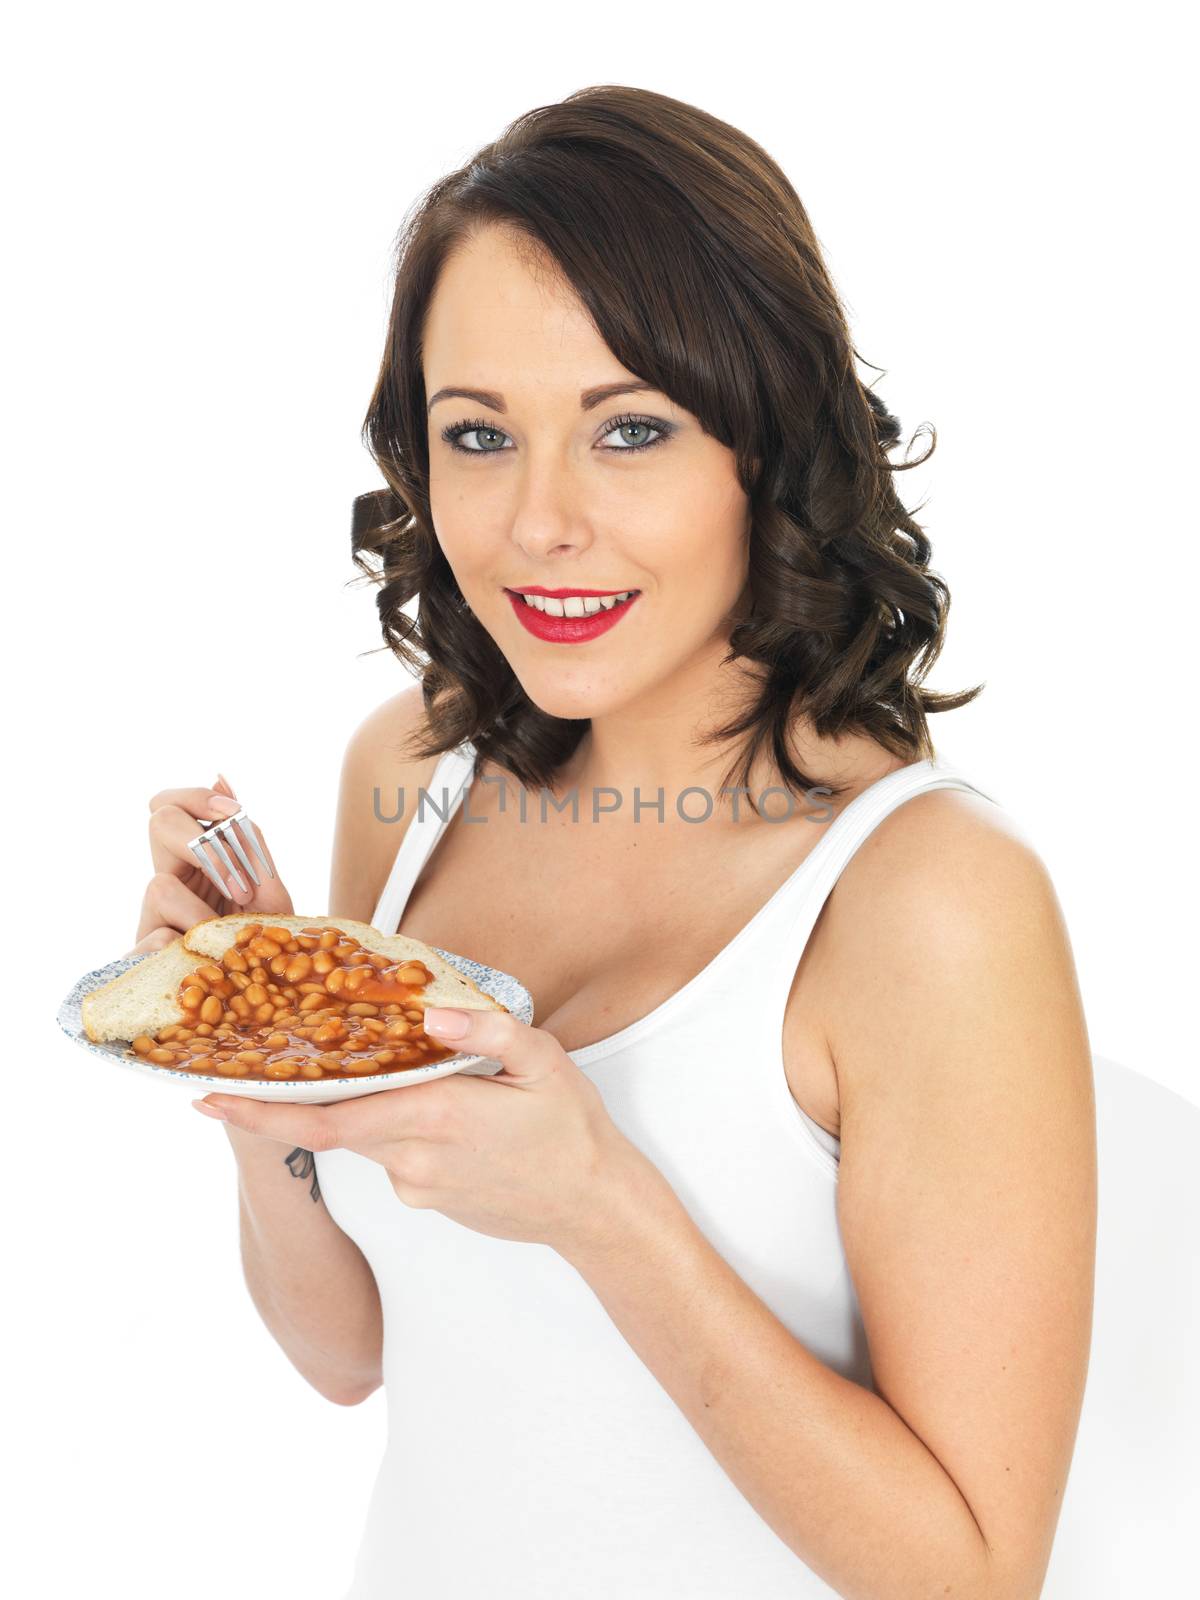 Young Woman Eating Baked Beans on Toast by Whiteboxmedia